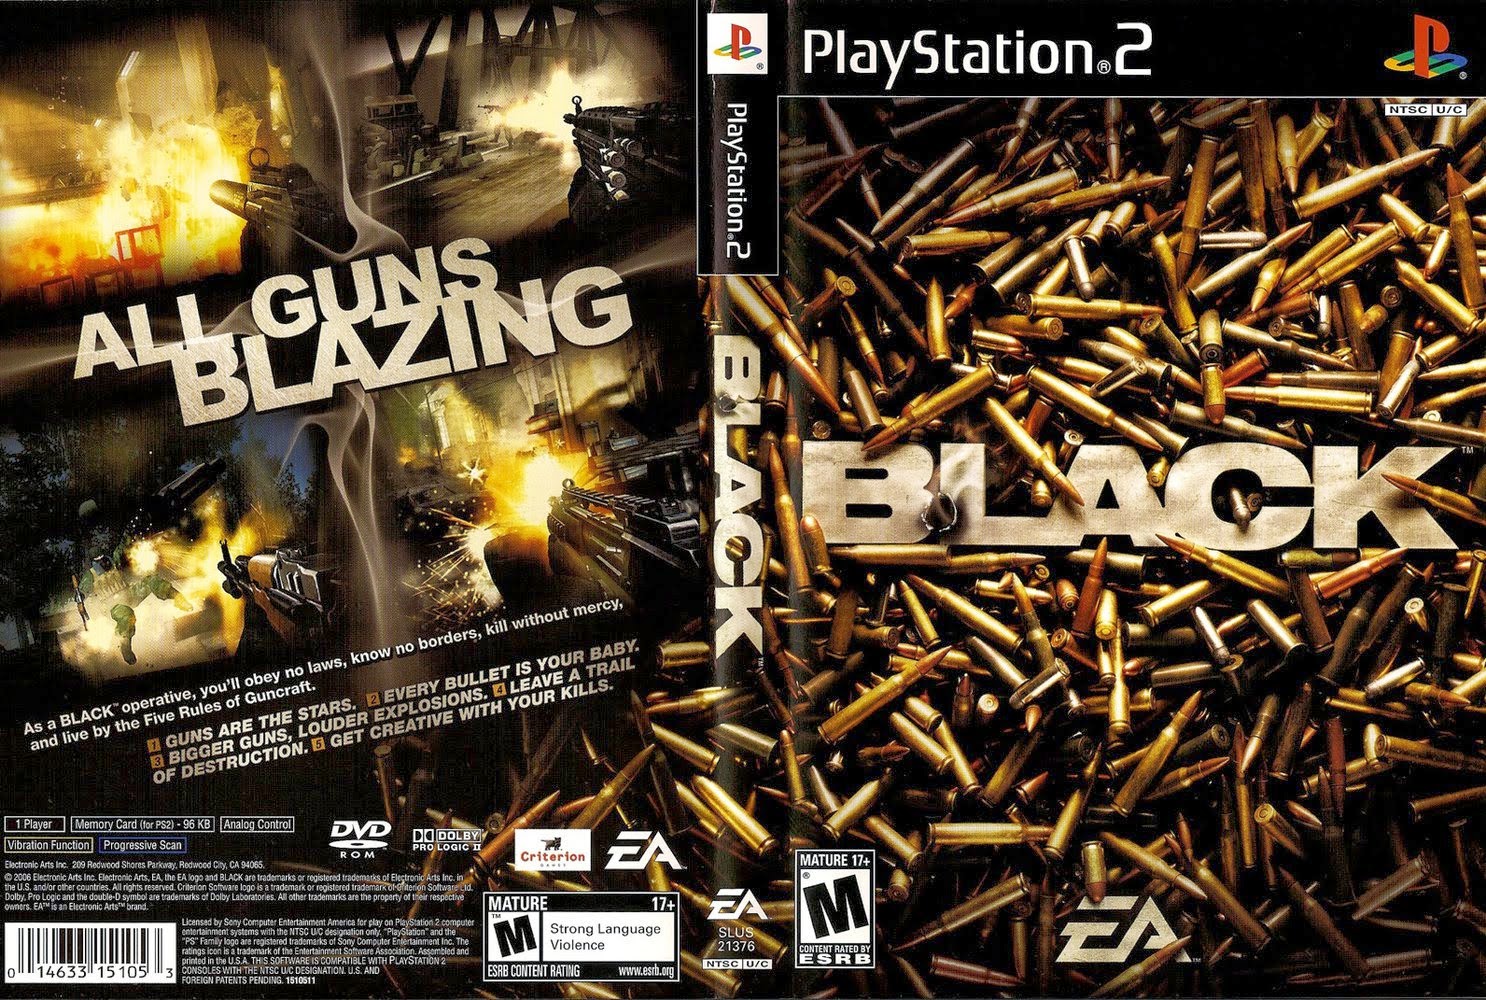 Download Game Black Ps2 For Pc